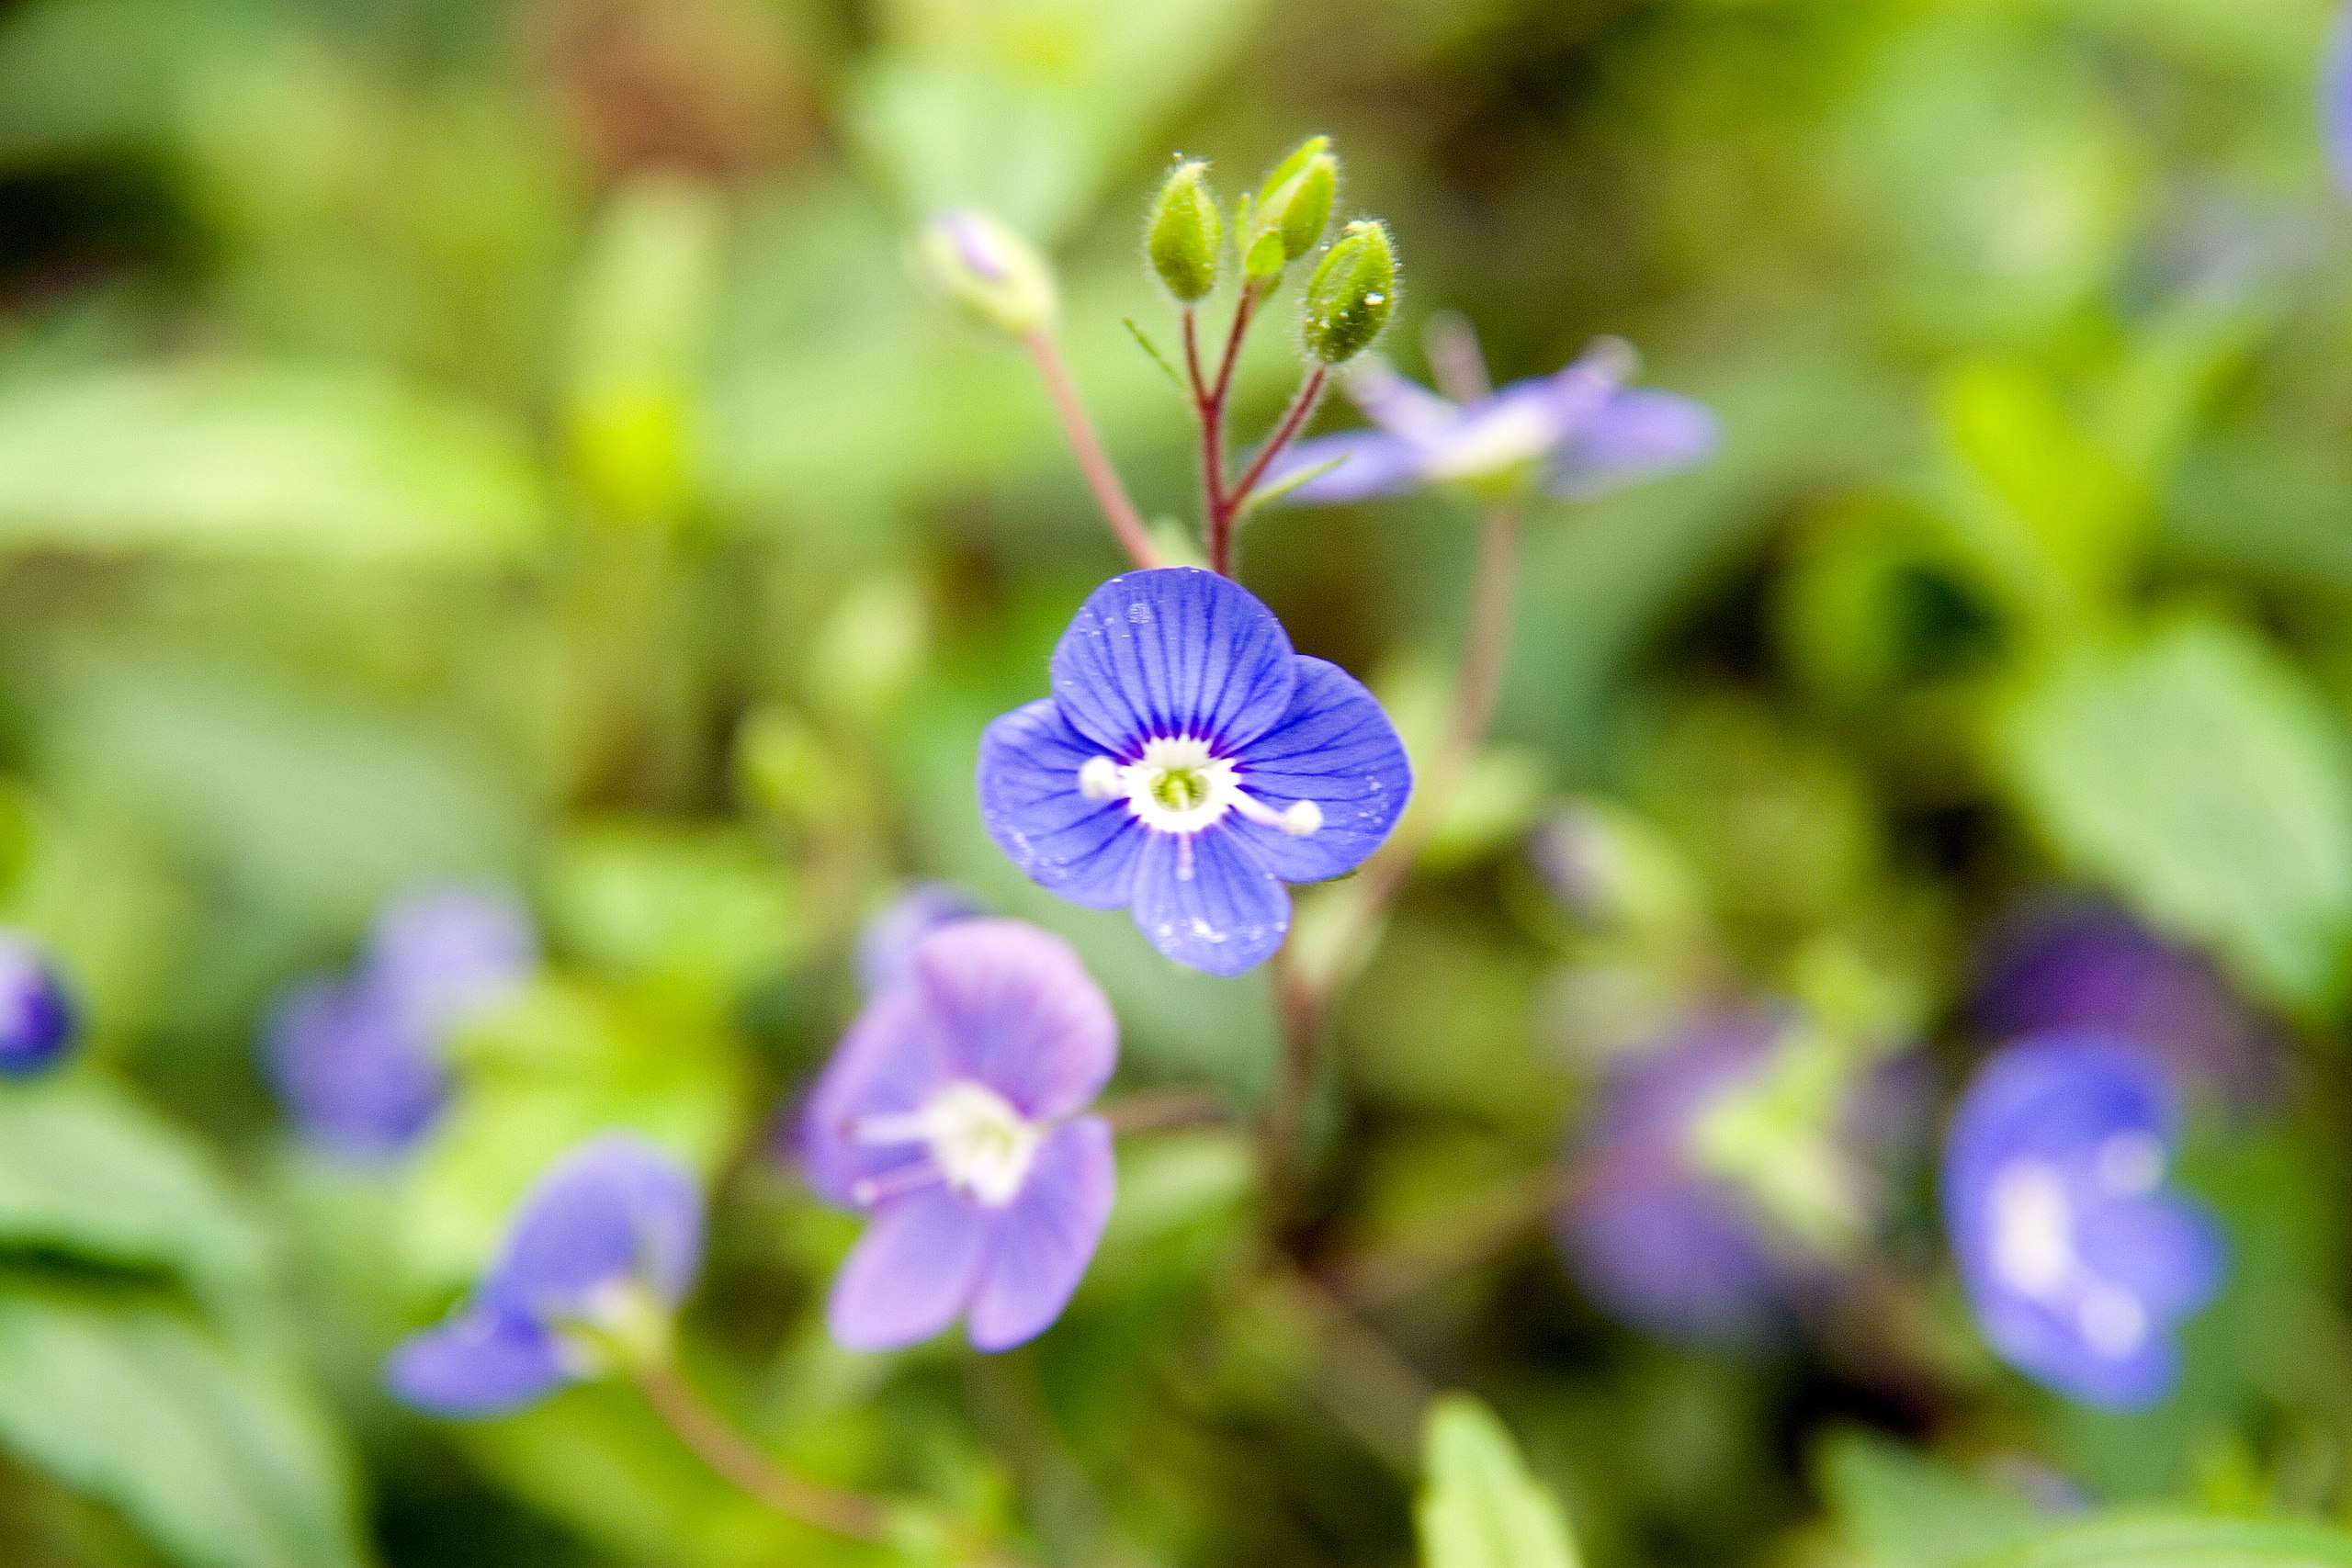 blue-violet flowers with white-yellow center and white stamens, lime buds, lime leaves and burgundy stems
